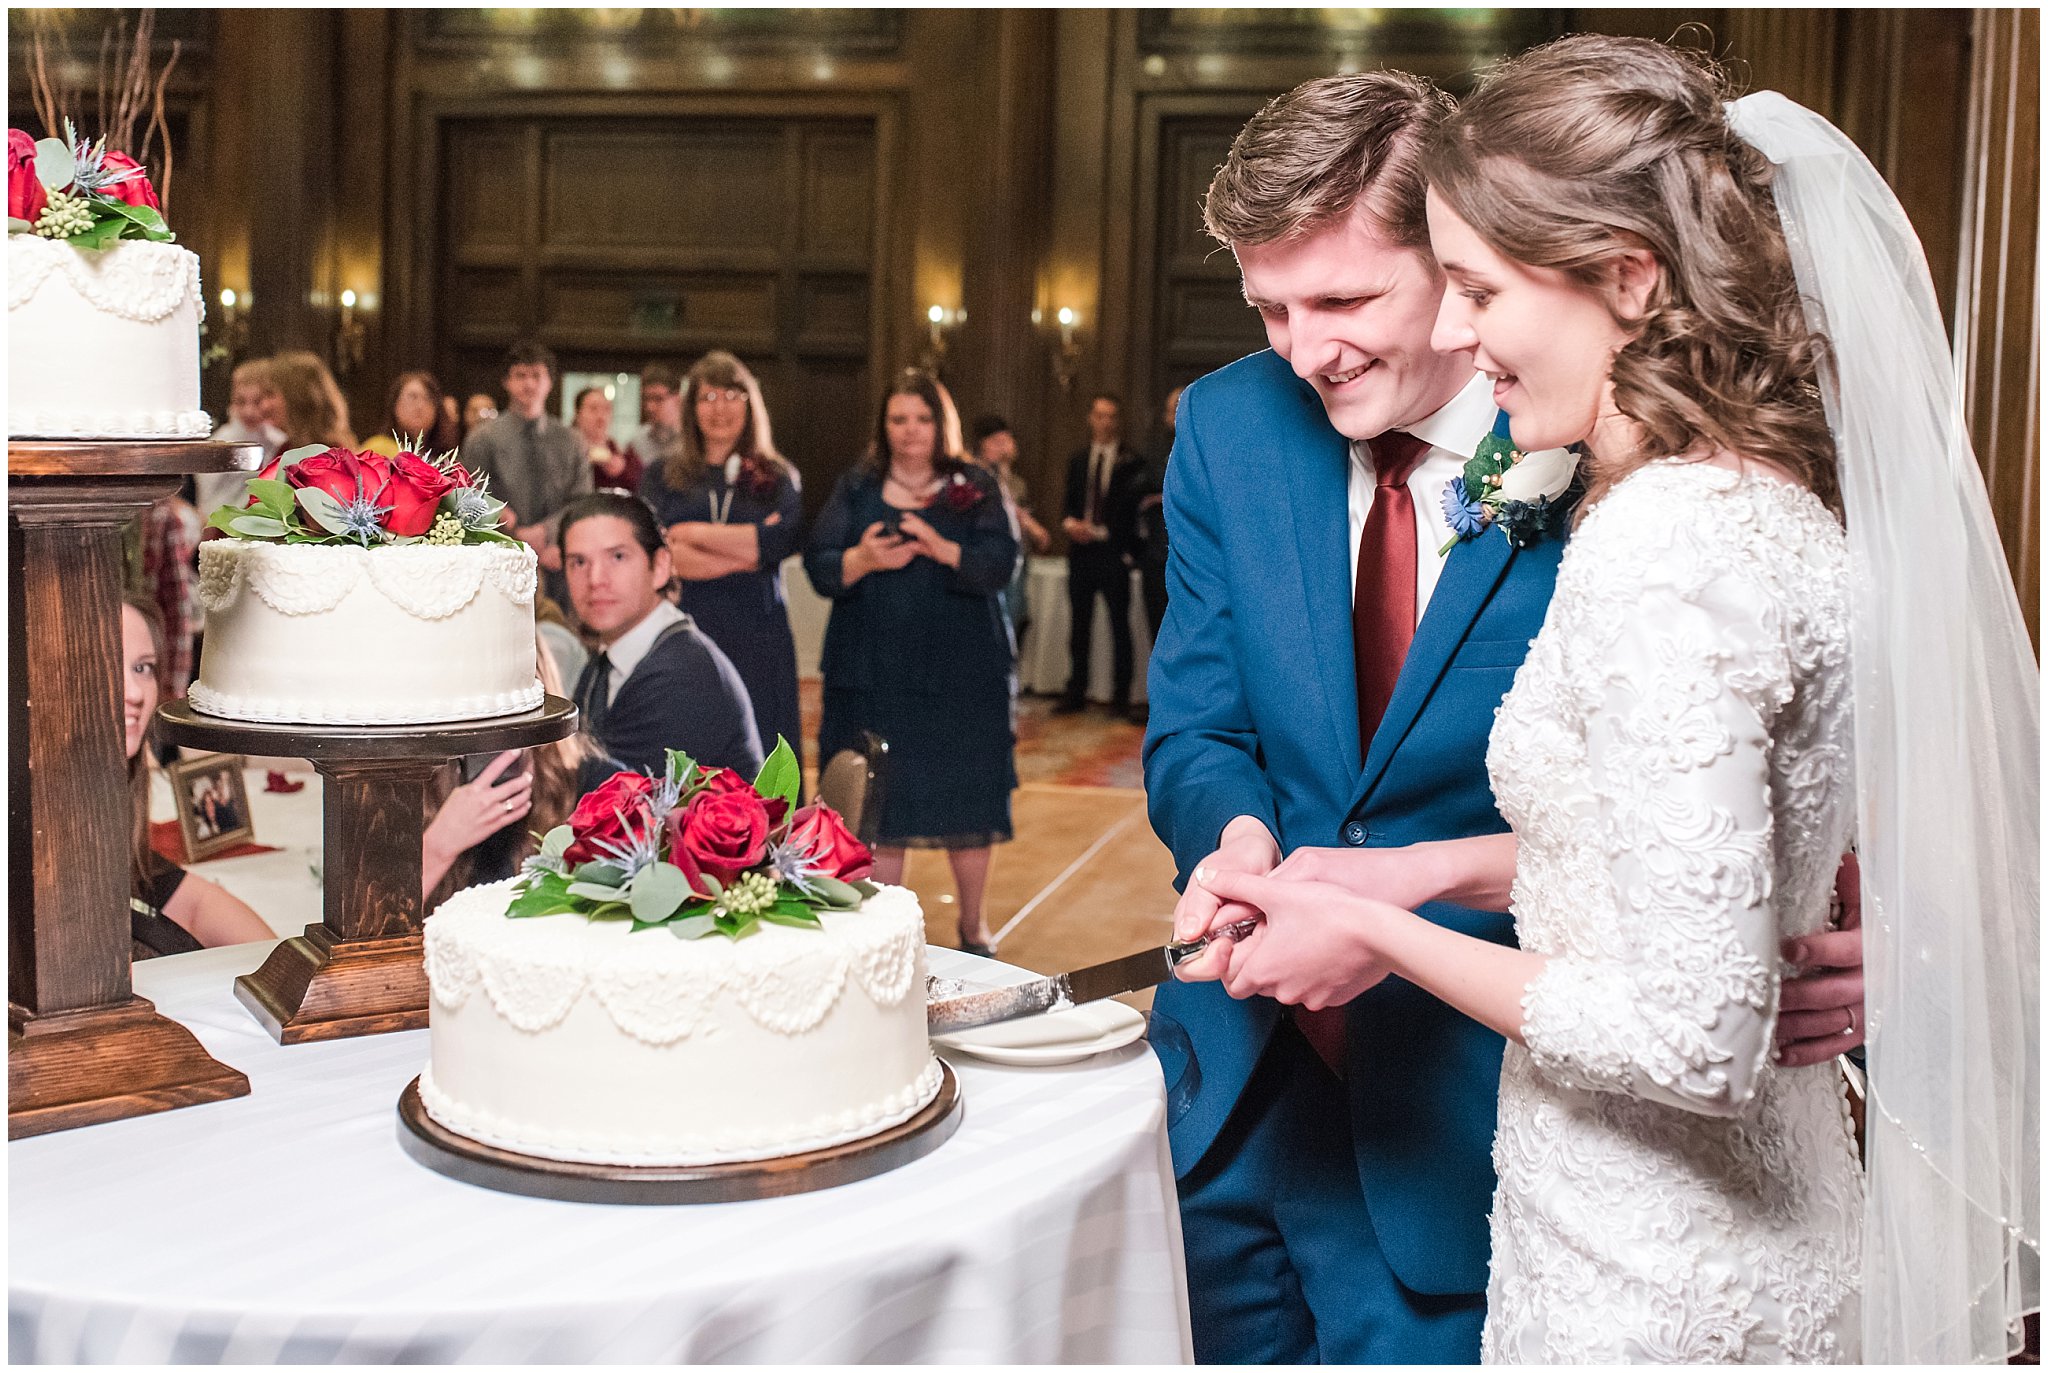 Vintage wedding cake with three tiers at Joseph Smith Memorial Building | navy and burgundy colors | Bountiful Temple Wedding and Joseph Smith Memorial Reception | Jessie and Dallin Photography